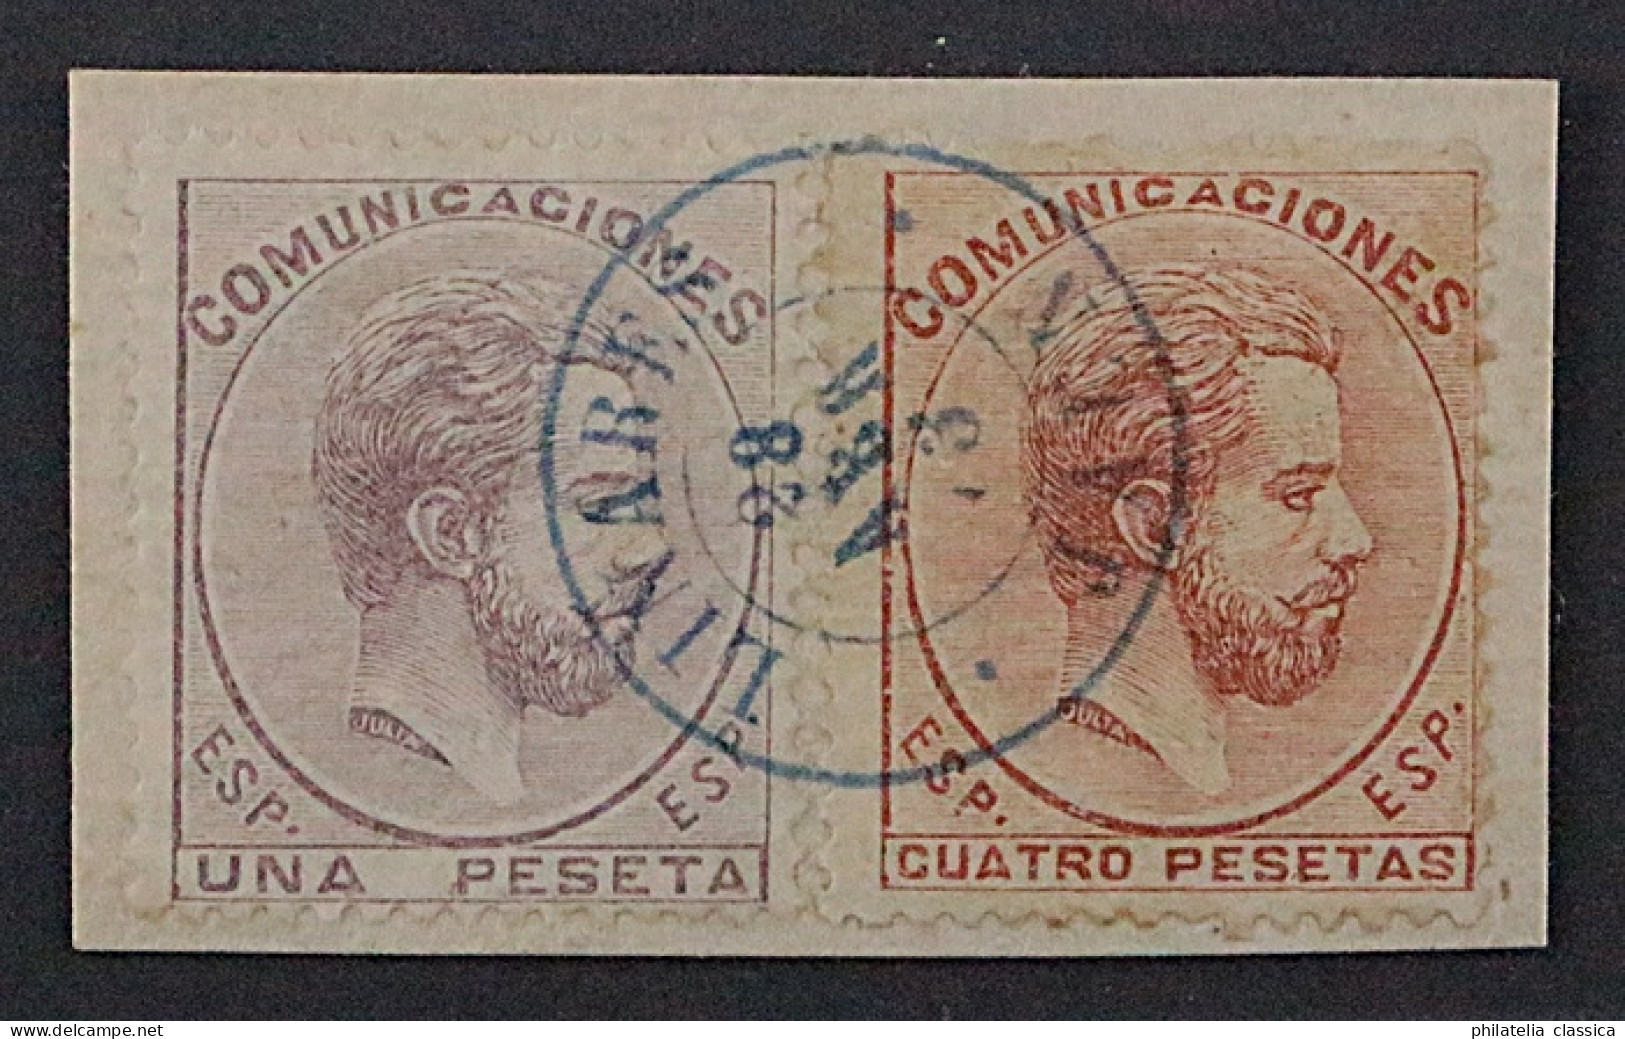 1872, SPANIEN 118+119, Amadeo 1+4 Pes. Briefstück LINARES JAEN Signiert 550,-€ - Used Stamps